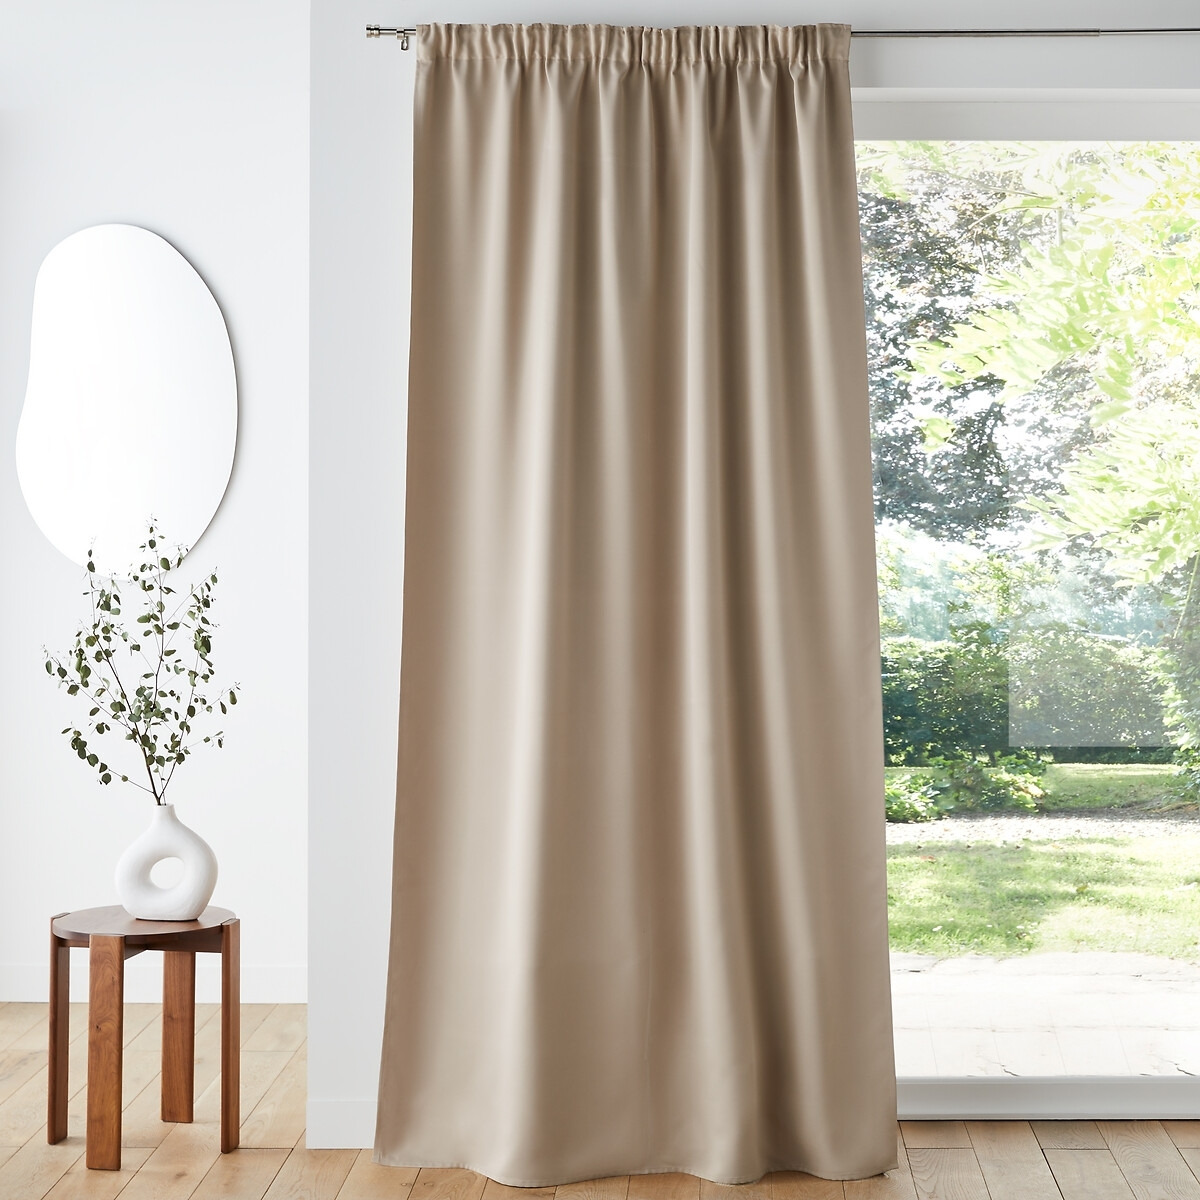 Voda Double-Sided Blackout Curtain - image 1